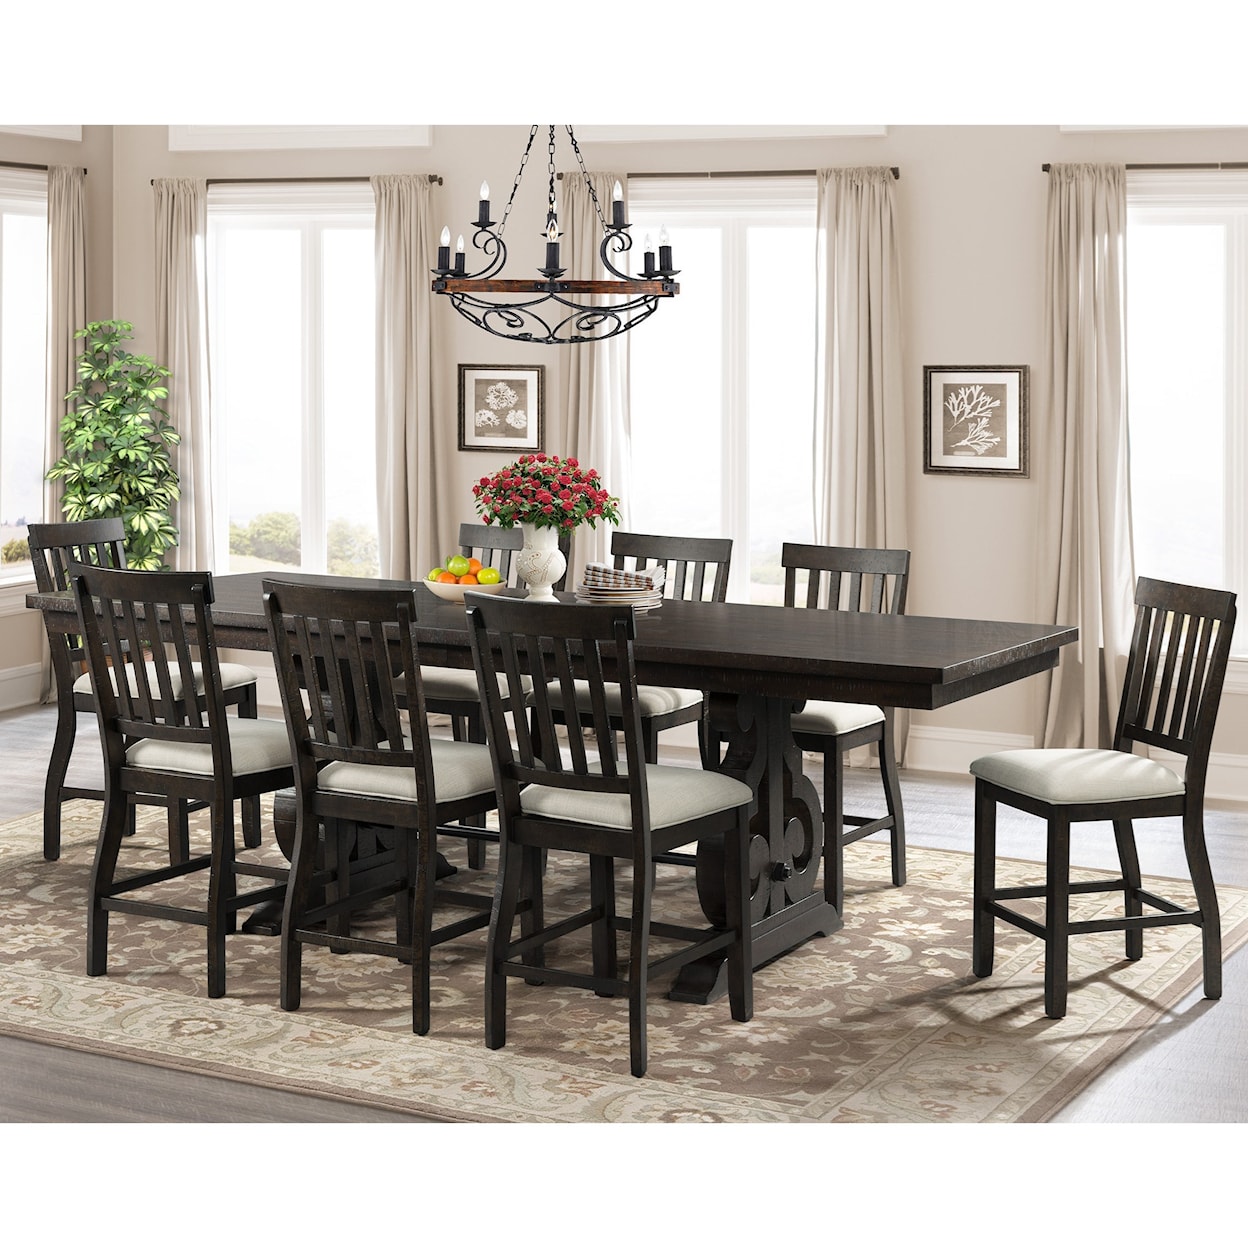 Elements International Stone 9-Piece Counter Height Dining Set